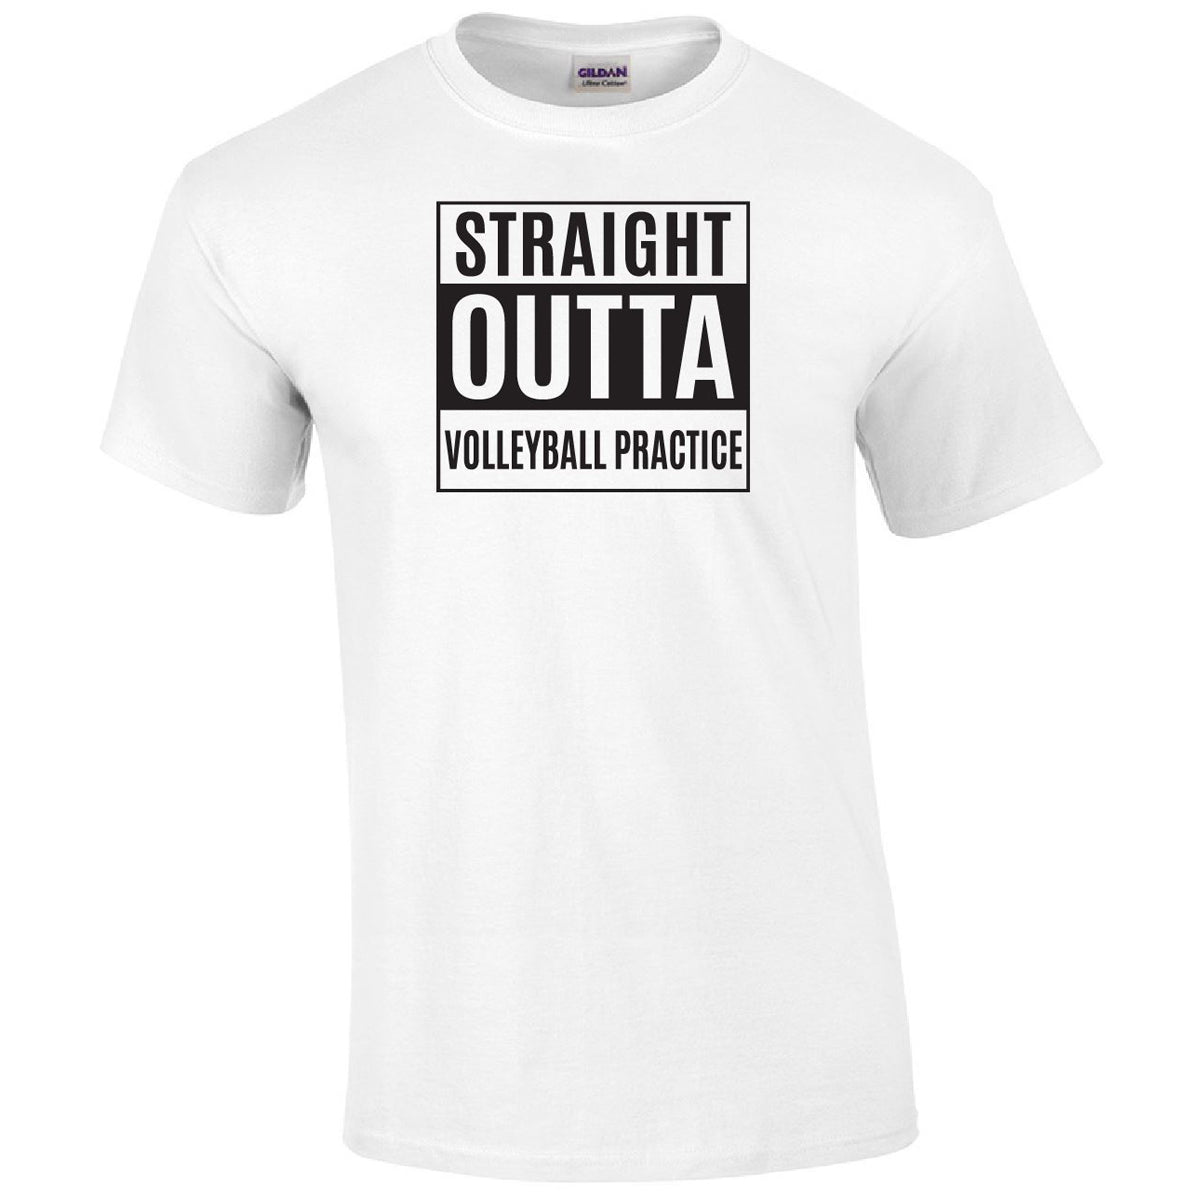 Straight Outta Volleyball Practice Printed Tee Humorous Shirt 411 Youth Medium White 